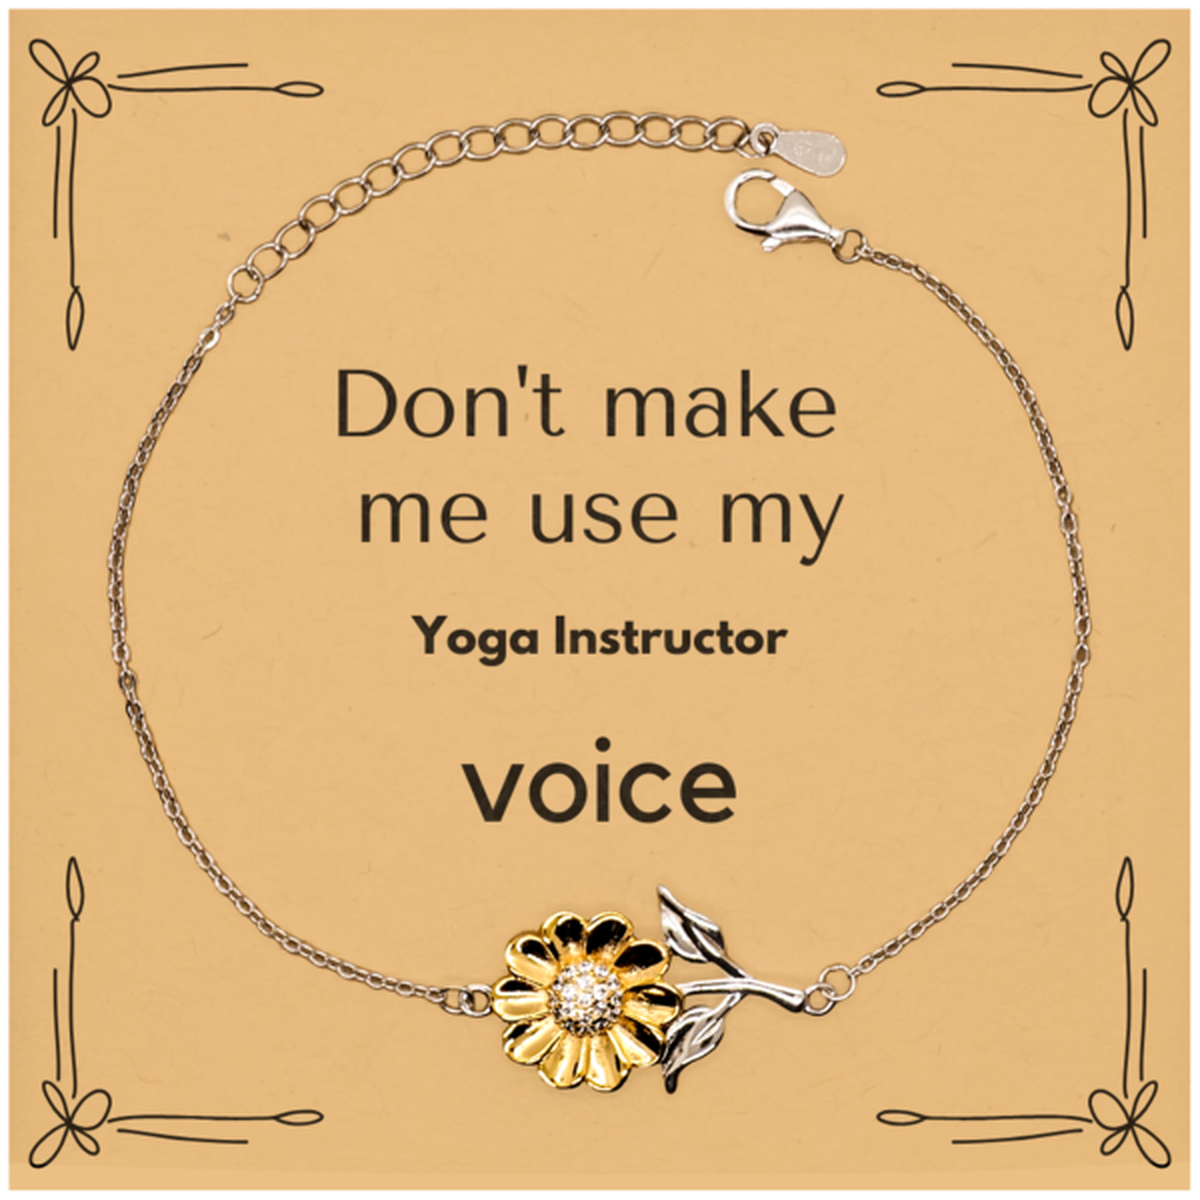 Don't make me use my Yoga Instructor voice, Sarcasm Yoga Instructor Card Gifts, Christmas Yoga Instructor Sunflower Bracelet Birthday Unique Gifts For Yoga Instructor Coworkers, Men, Women, Colleague, Friends